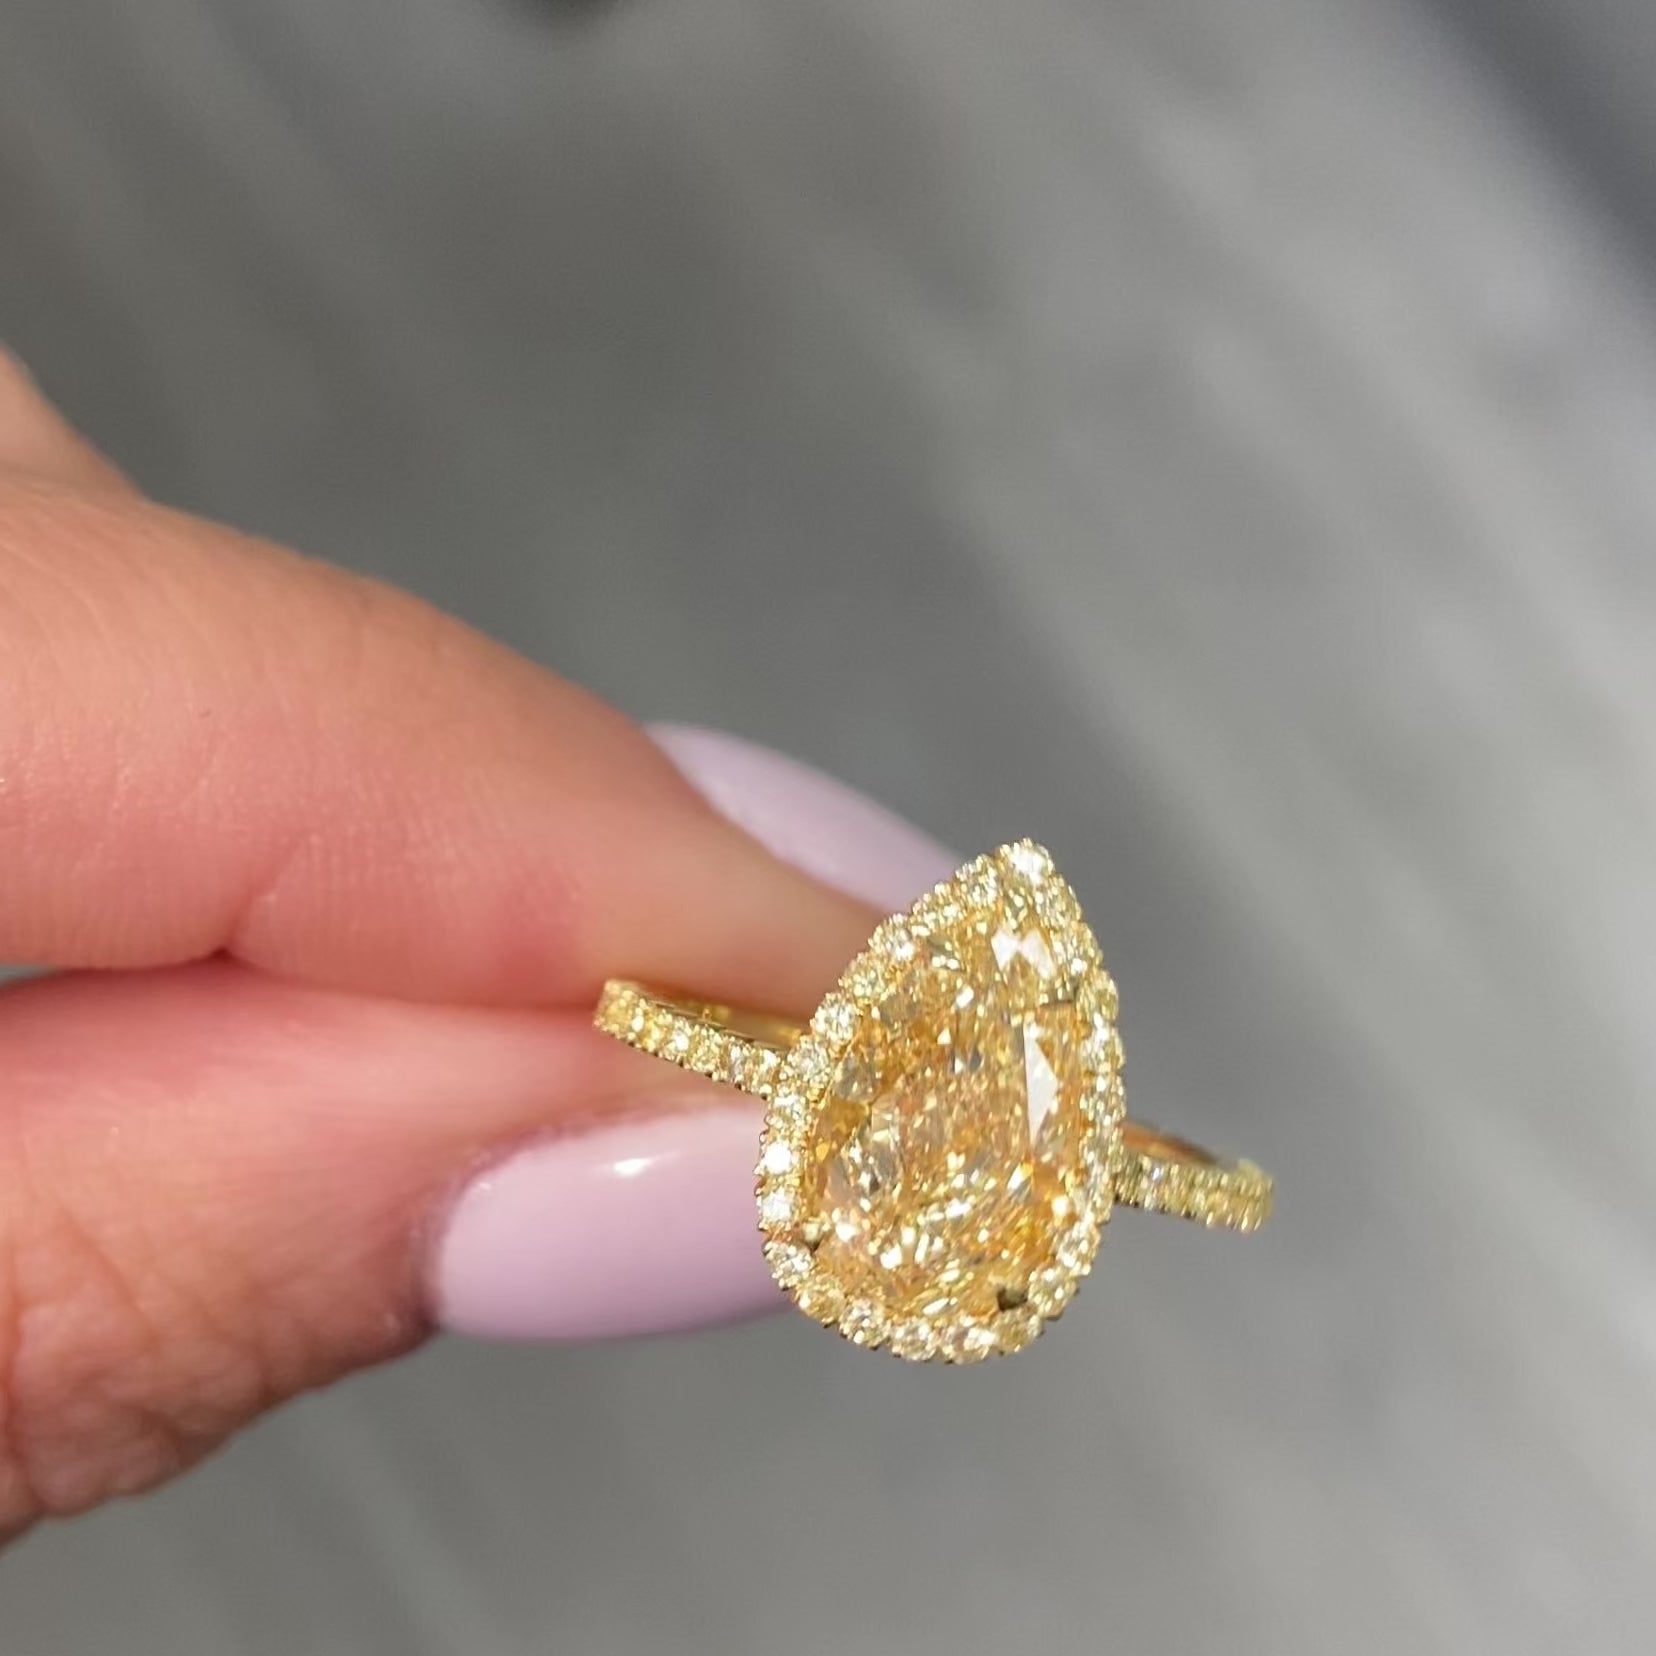 Yellow diamond halo engagement ring, canary diamond engagement ring, all yellow diamonds, natural diamond ring